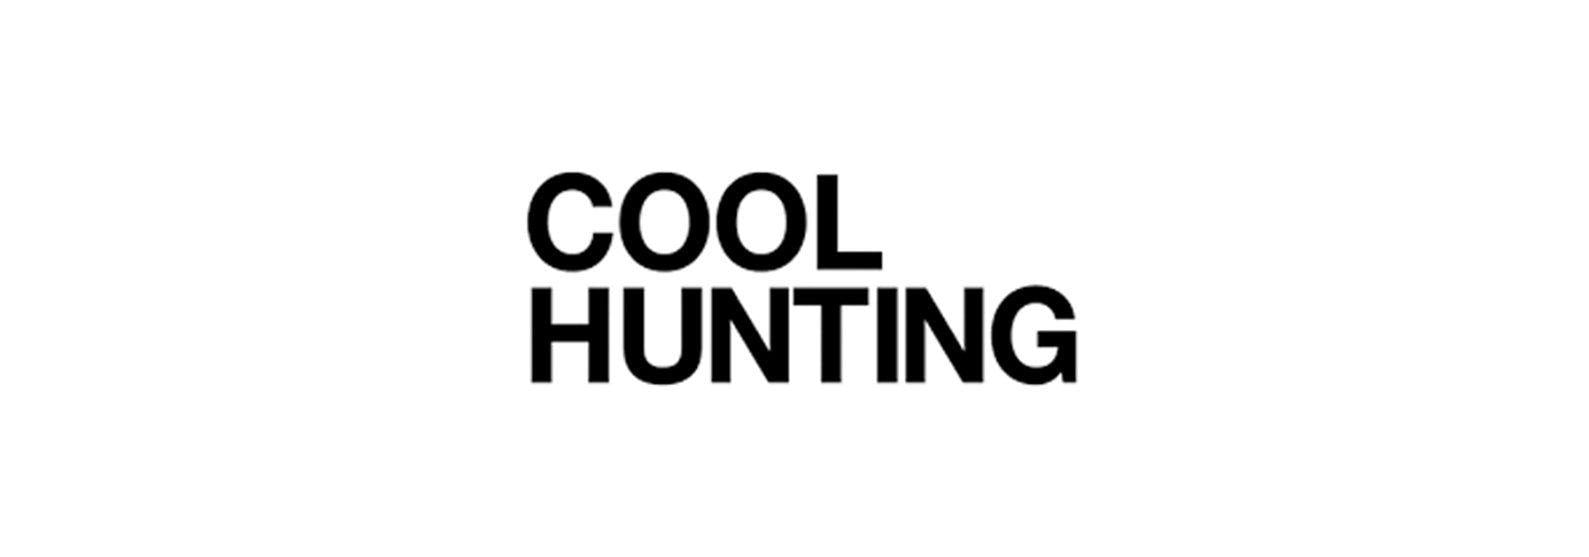 Black and White Hunting Logo - Bringing bright pops of color to a medium typically limited to ...